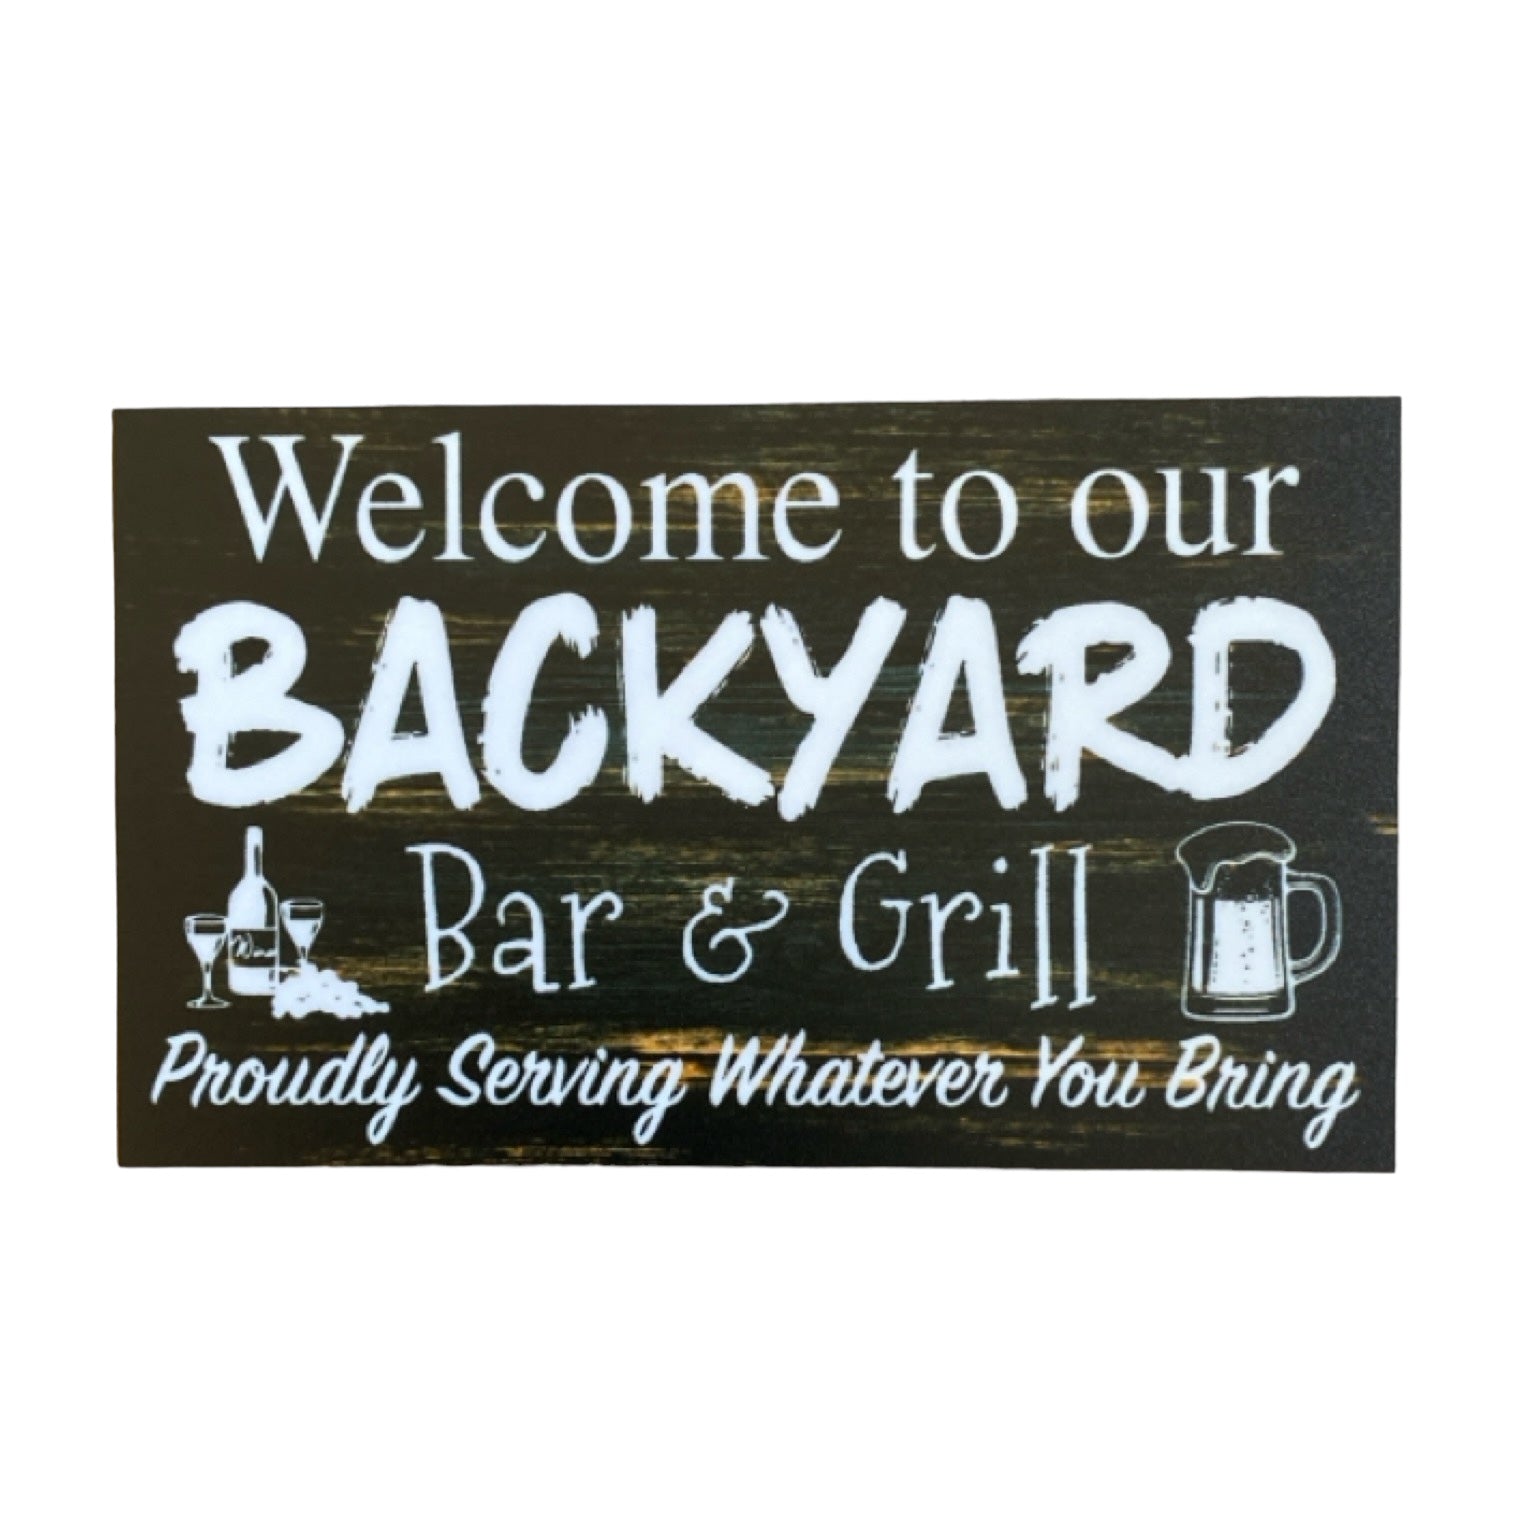 Welcome Backyard Bar Grill Serving What You Bring Sign - The Renmy Store Homewares & Gifts 